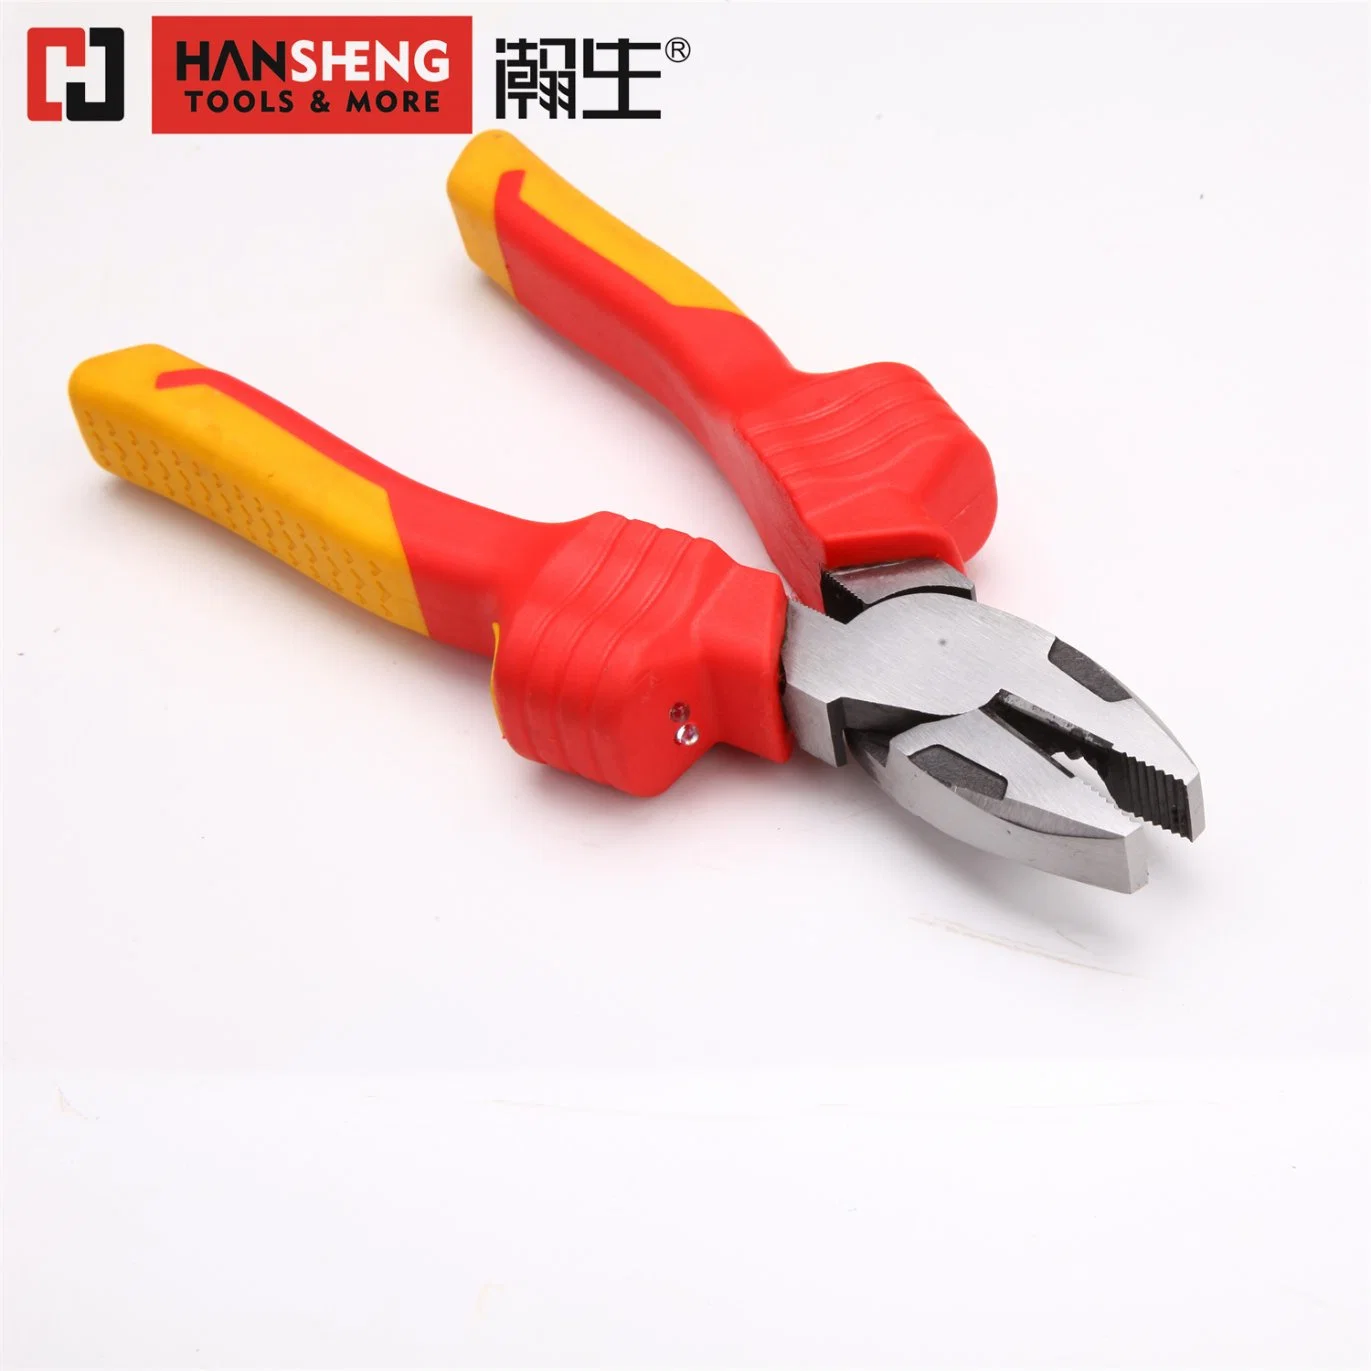 VDE Combination Pliers, Hand Tools, Hardware Tools, Cutting Tools, with 1000V Handle, Professional Hand Tool, Pliers, Insulating Tools